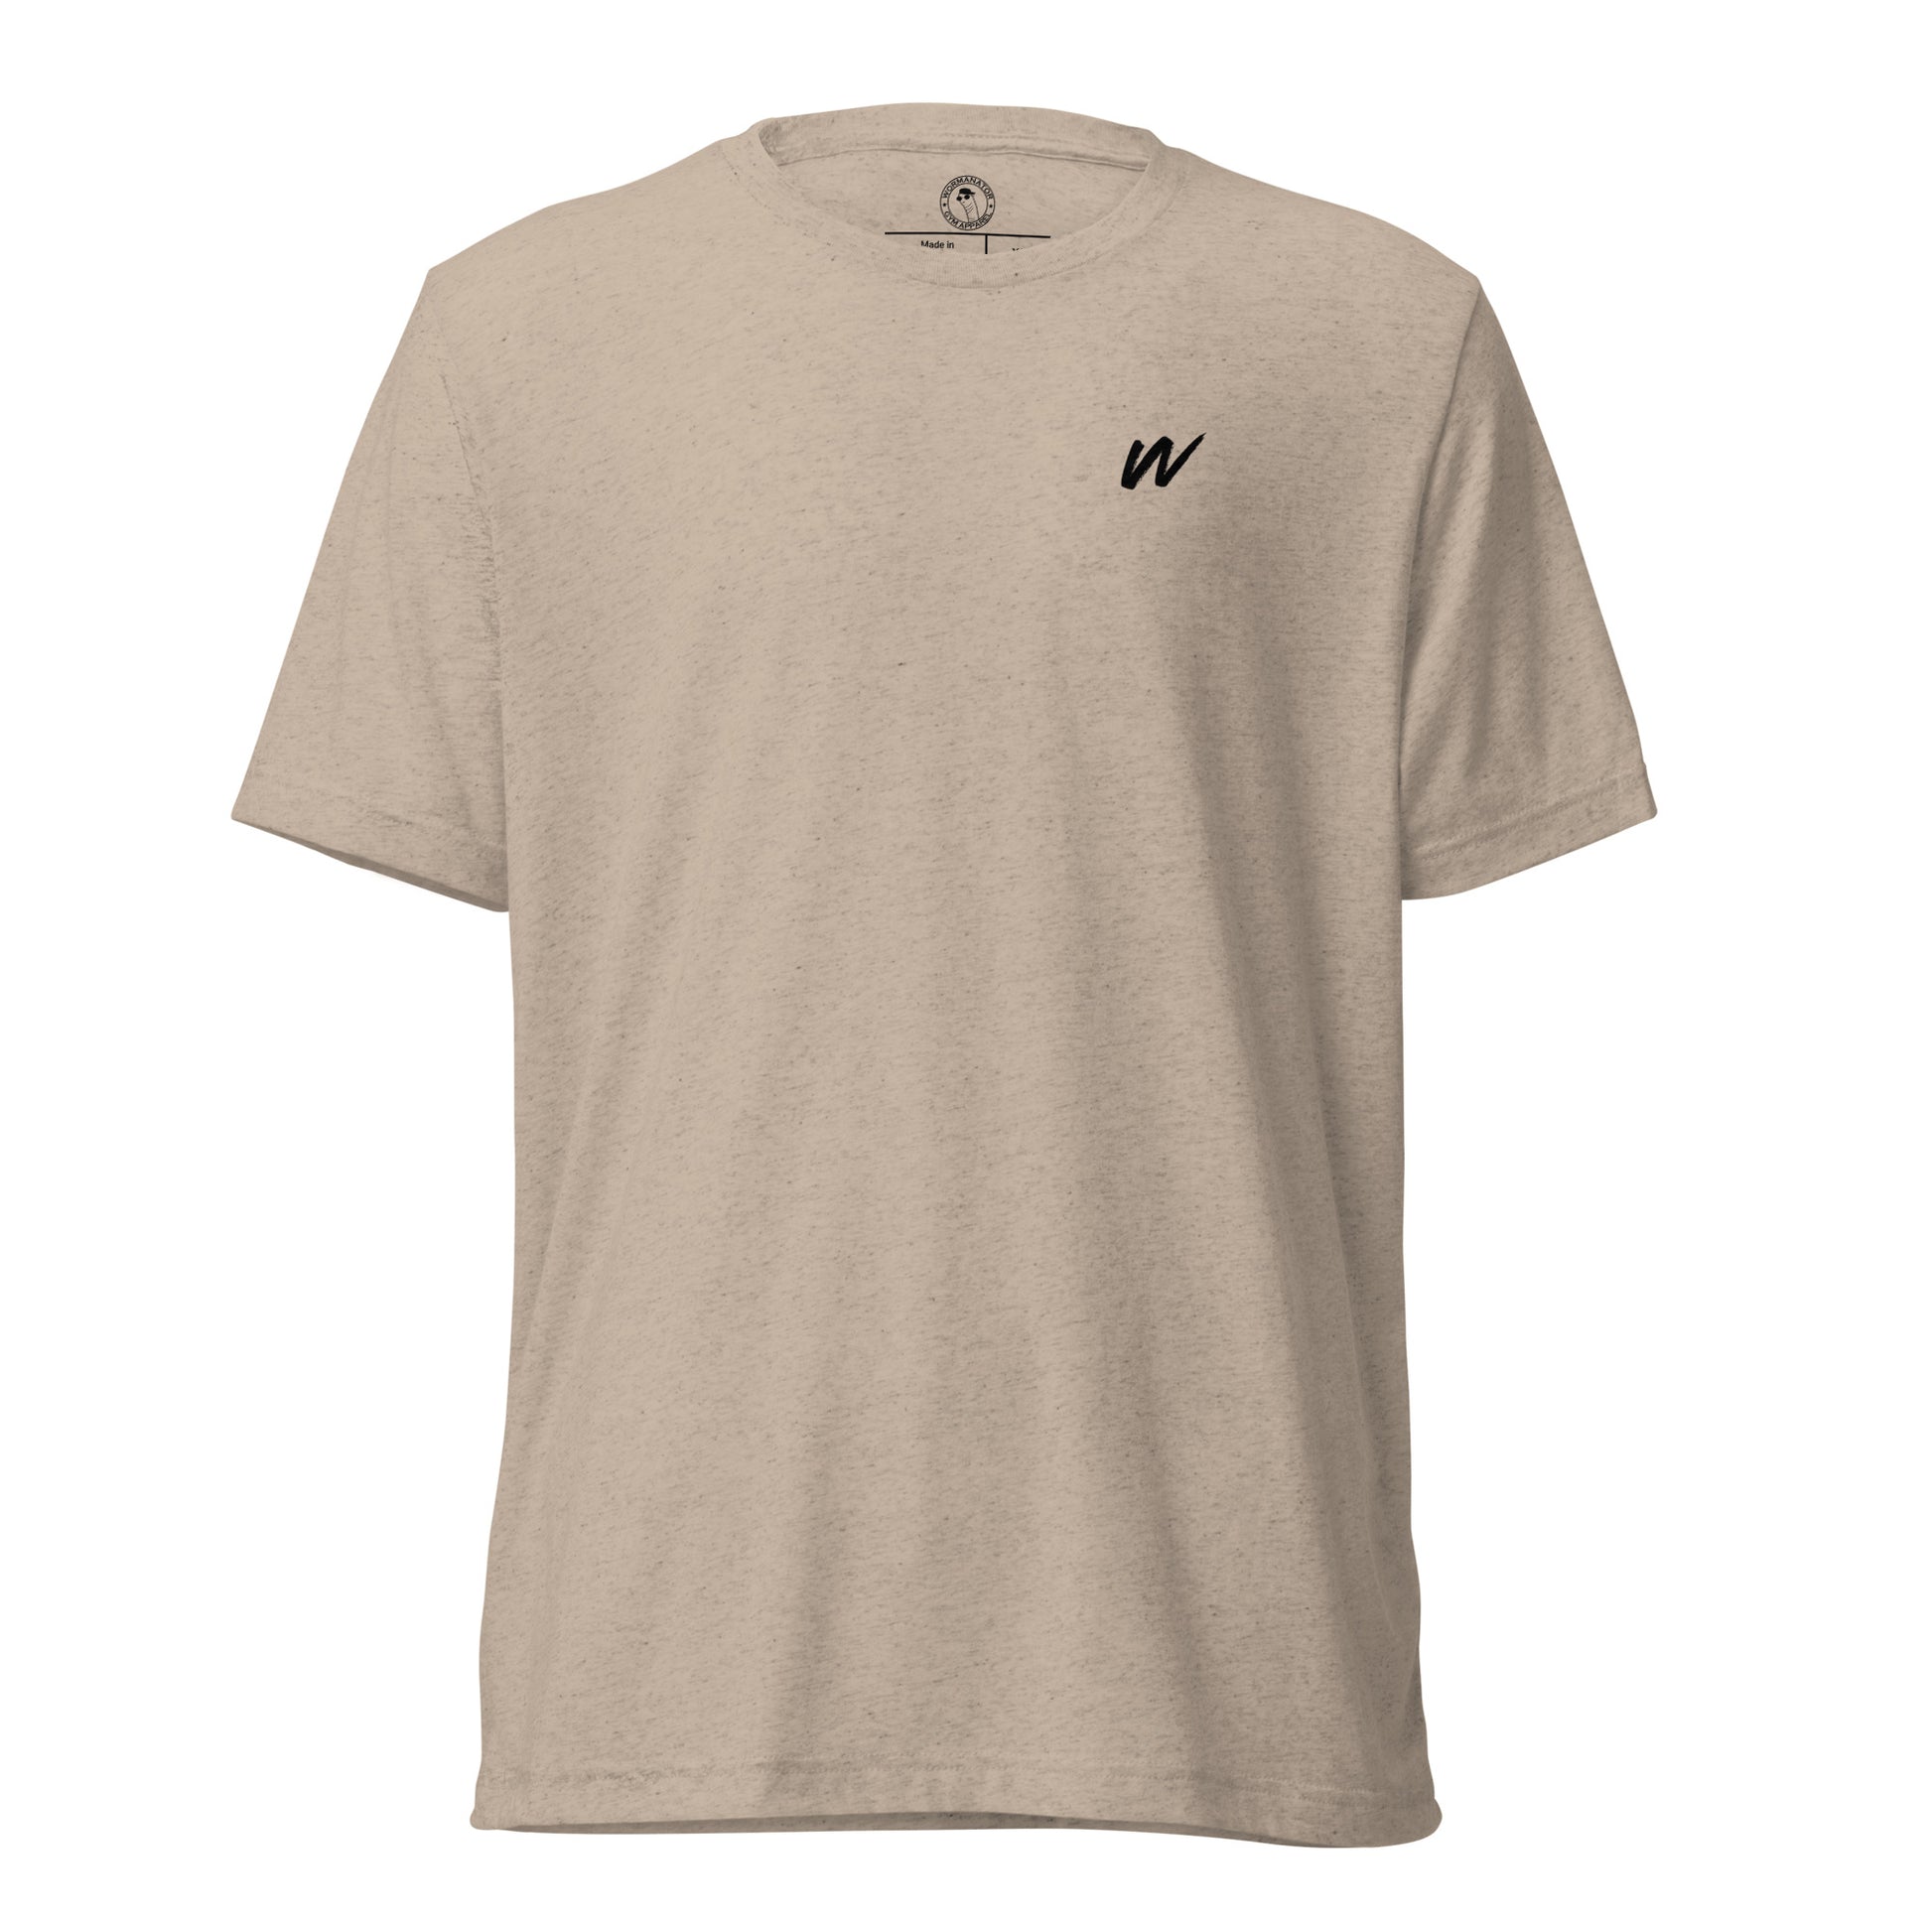 Win the Day T-Shirt in Tan Triblend